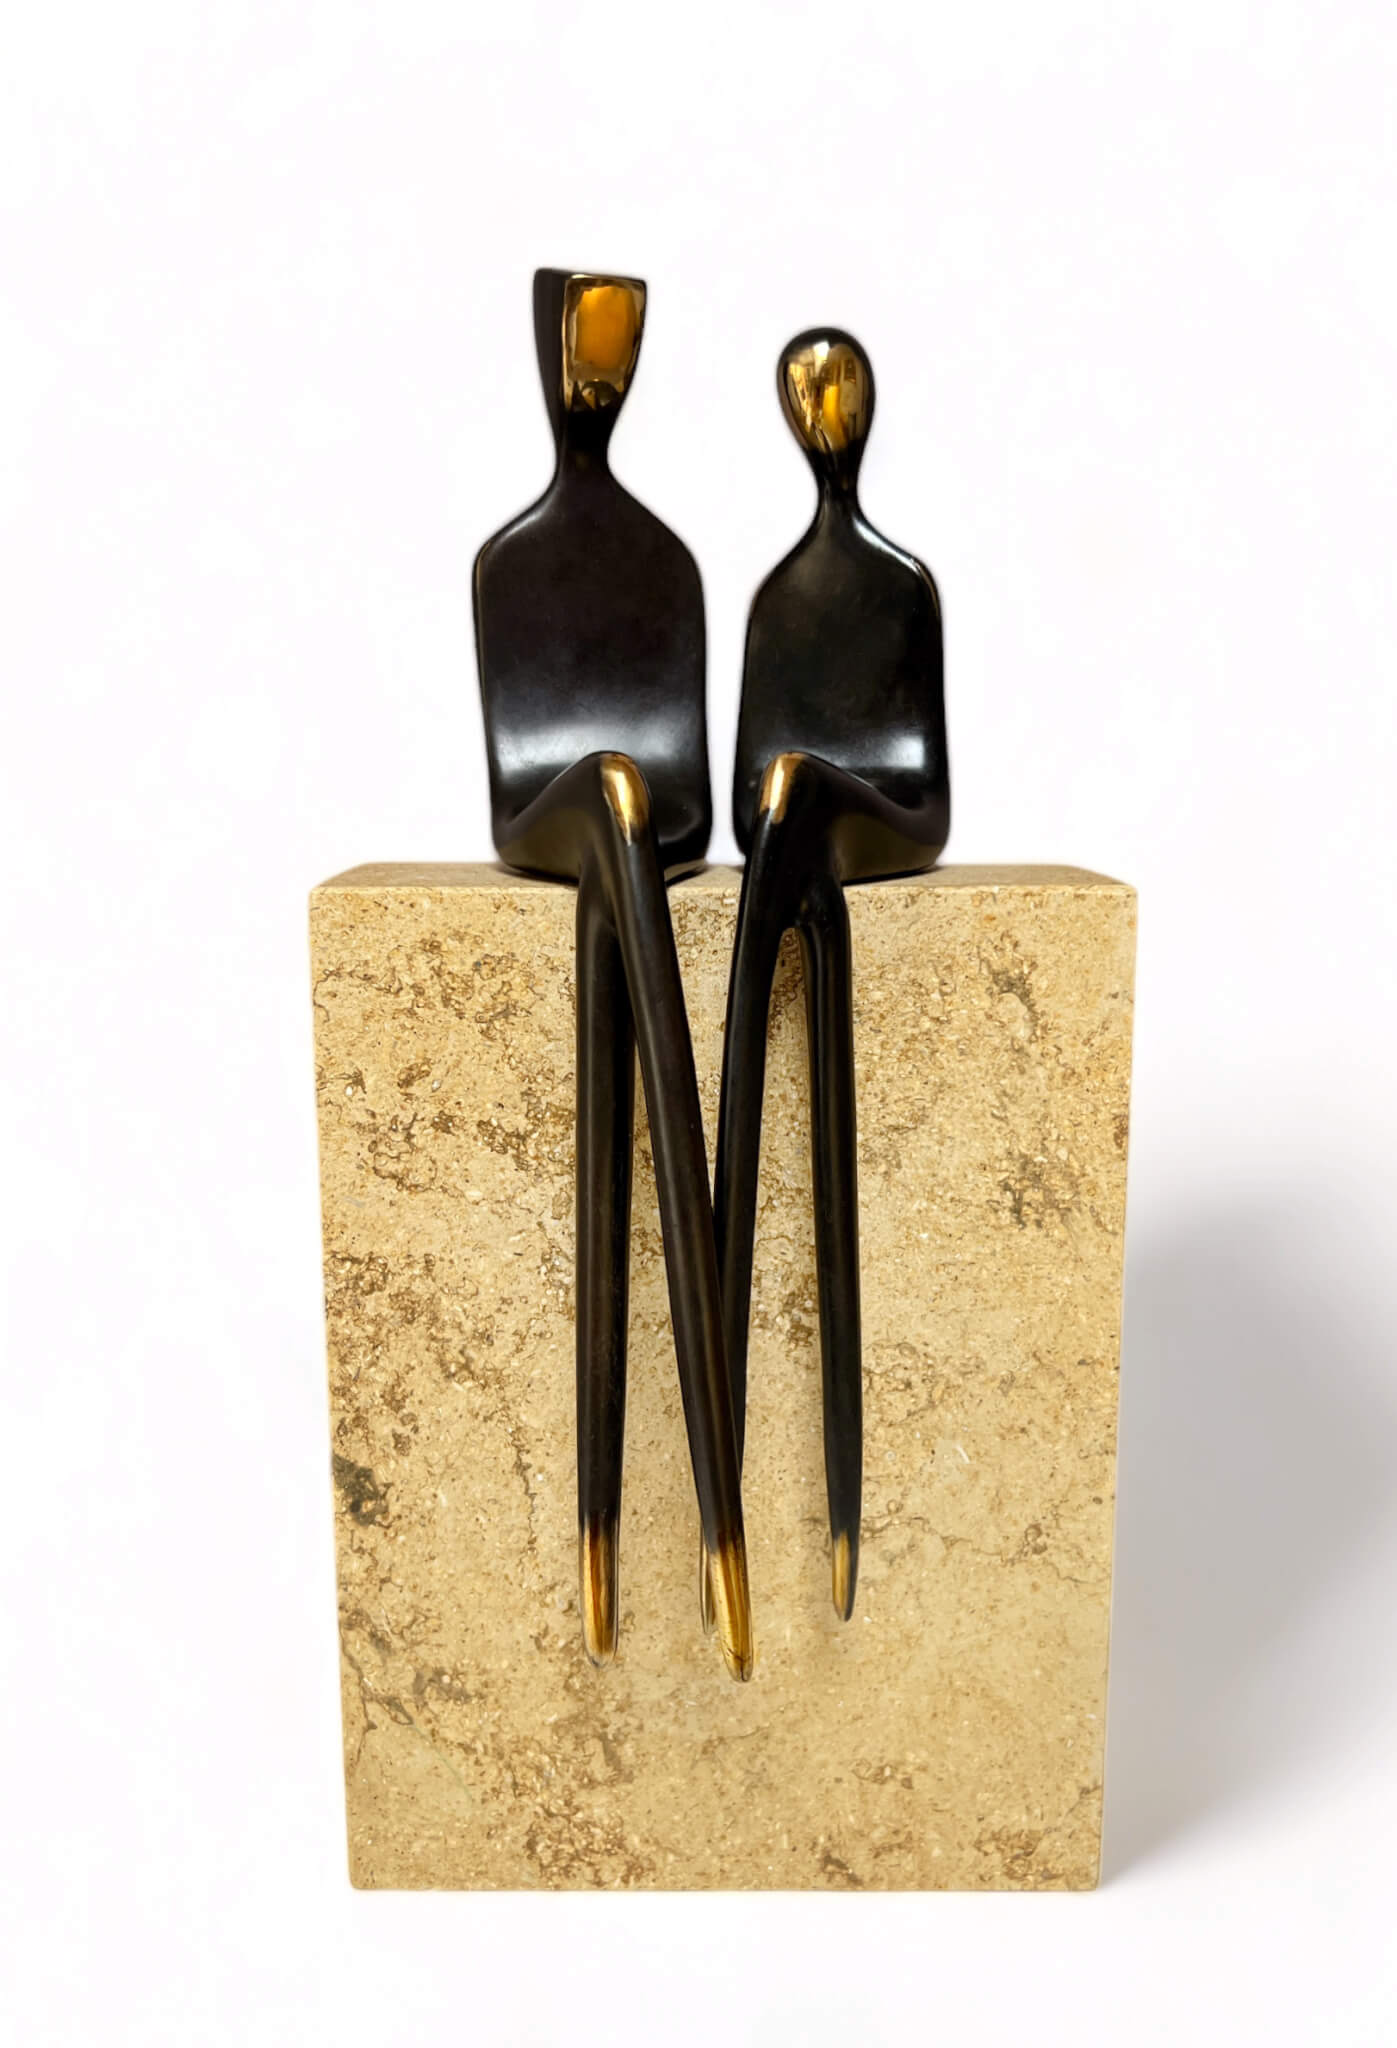 The two of us - bronze anniversary solid bronze sculpture of a seated couple by Yenny Cocq